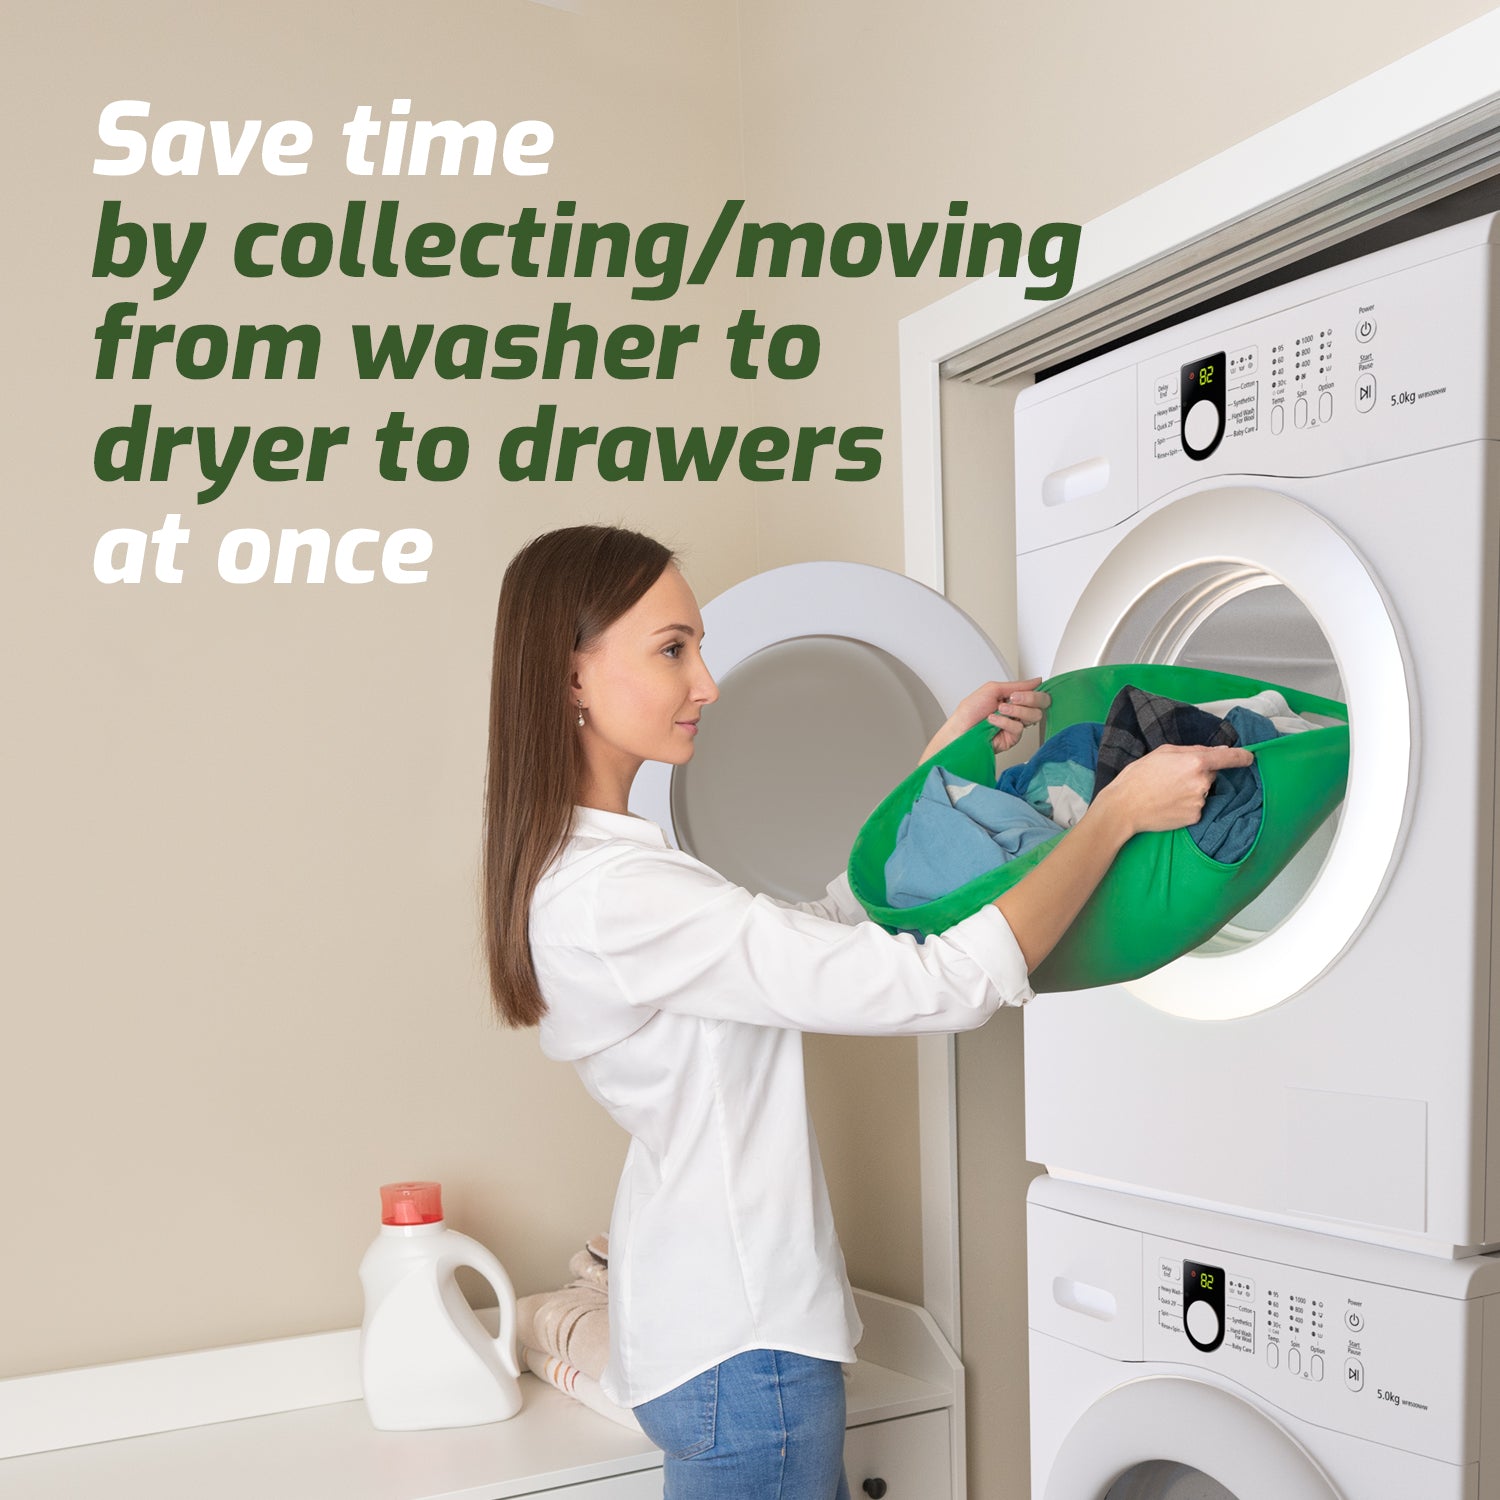 A woman opening a Laundry Turtle washing machine to save time collecting laundry from washer to dryer.